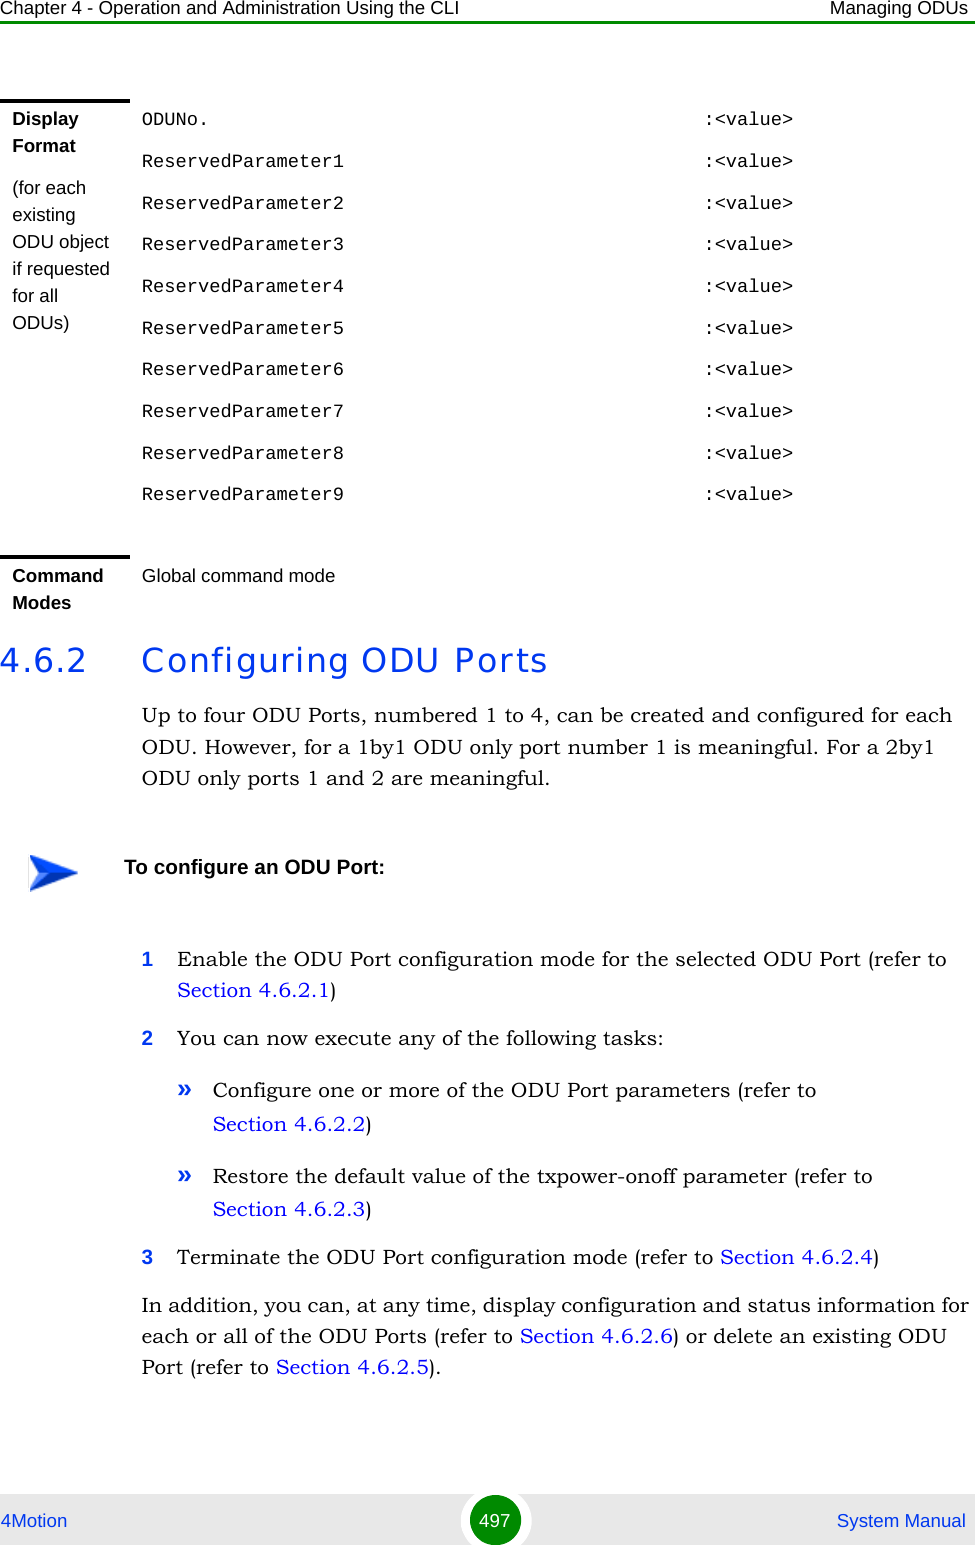 Chapter 4 - Operation and Administration Using the CLI Managing ODUs4Motion 497  System Manual4.6.2 Configuring ODU PortsUp to four ODU Ports, numbered 1 to 4, can be created and configured for each ODU. However, for a 1by1 ODU only port number 1 is meaningful. For a 2by1 ODU only ports 1 and 2 are meaningful.1Enable the ODU Port configuration mode for the selected ODU Port (refer to Section 4.6.2.1)2You can now execute any of the following tasks:»Configure one or more of the ODU Port parameters (refer to Section 4.6.2.2)»Restore the default value of the txpower-onoff parameter (refer to Section 4.6.2.3)3Terminate the ODU Port configuration mode (refer to Section 4.6.2.4)In addition, you can, at any time, display configuration and status information for each or all of the ODU Ports (refer to Section 4.6.2.6) or delete an existing ODU Port (refer to Section 4.6.2.5). Display Format(for each existing ODU object if requested for all ODUs)ODUNo.                                            :&lt;value&gt;ReservedParameter1                                :&lt;value&gt;ReservedParameter2                                :&lt;value&gt;ReservedParameter3                                :&lt;value&gt;ReservedParameter4                                :&lt;value&gt;ReservedParameter5                                :&lt;value&gt;ReservedParameter6                                :&lt;value&gt;ReservedParameter7                                :&lt;value&gt;ReservedParameter8                                :&lt;value&gt;ReservedParameter9                                :&lt;value&gt;Command ModesGlobal command modeTo configure an ODU Port: